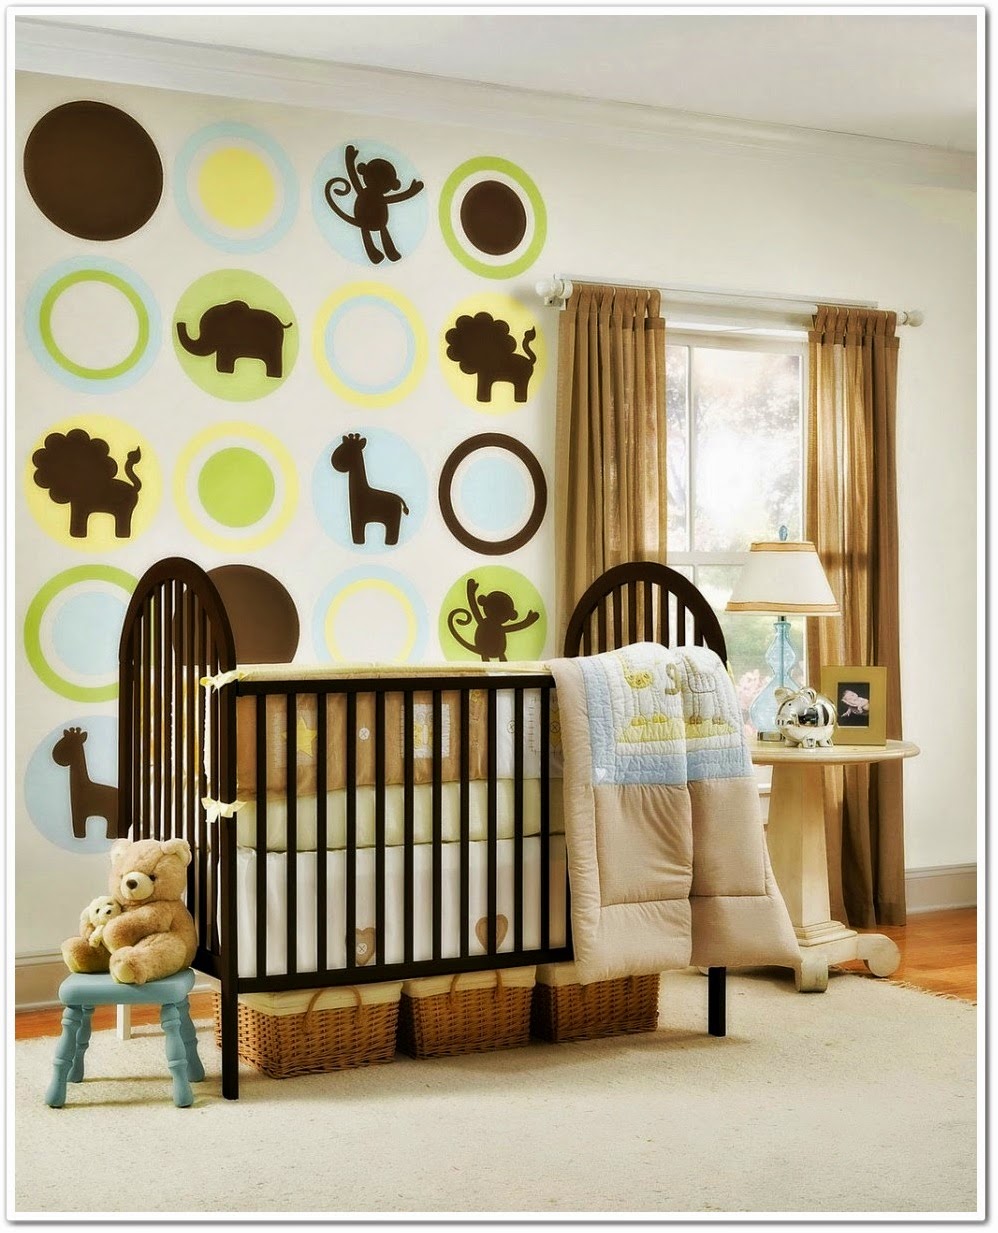 5 Nursery Accessories That Are Useful and Decorative